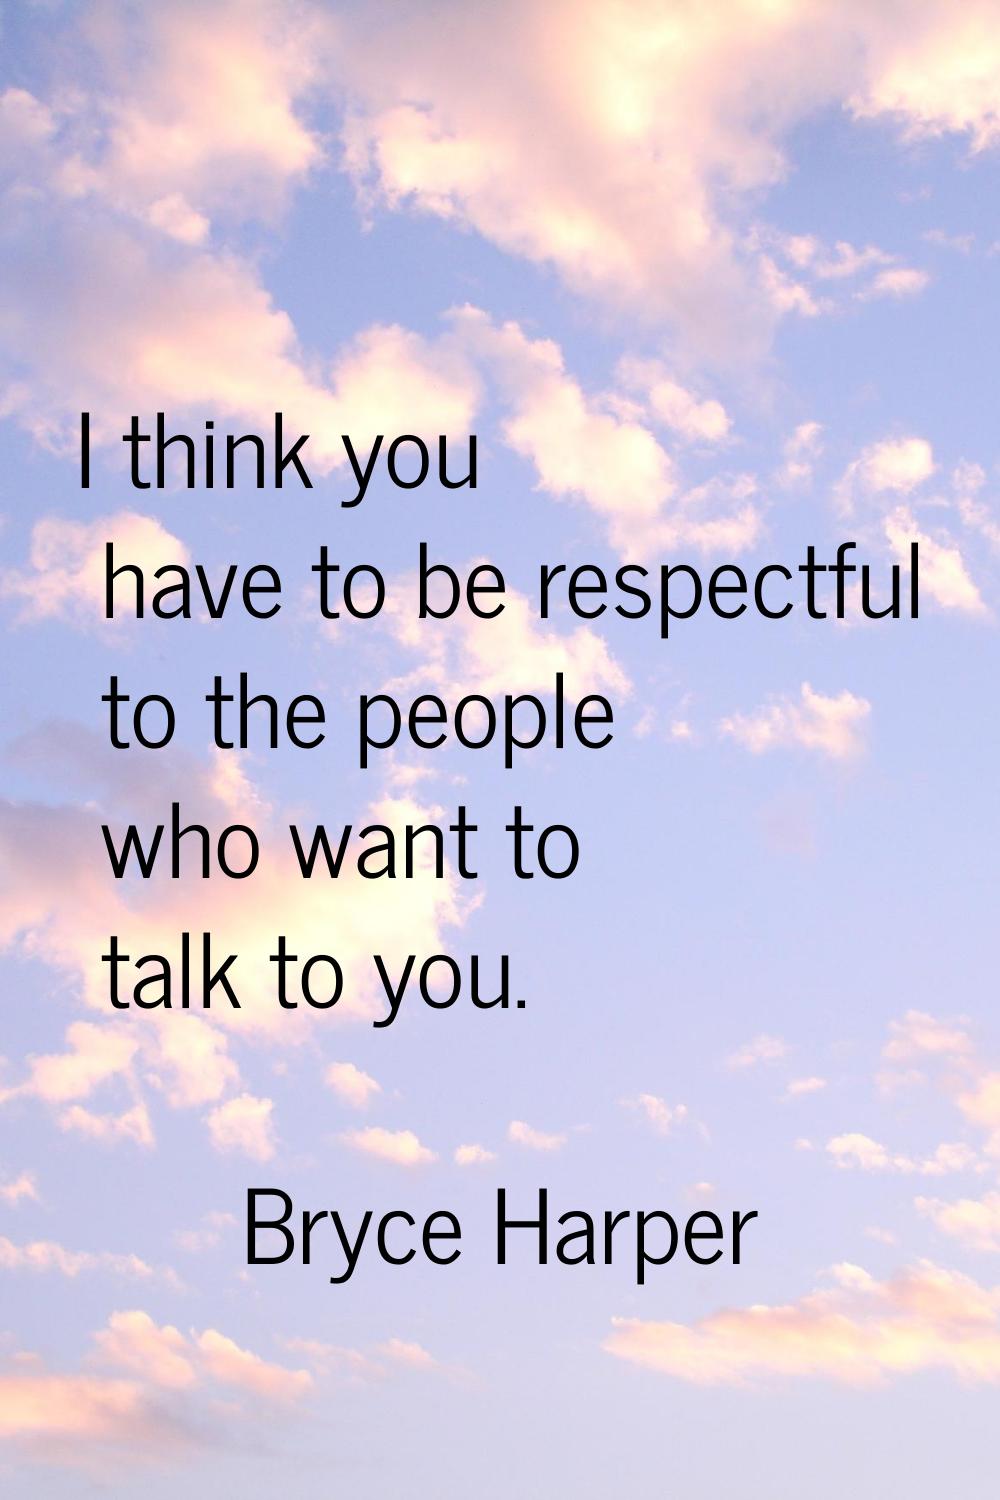 I think you have to be respectful to the people who want to talk to you.